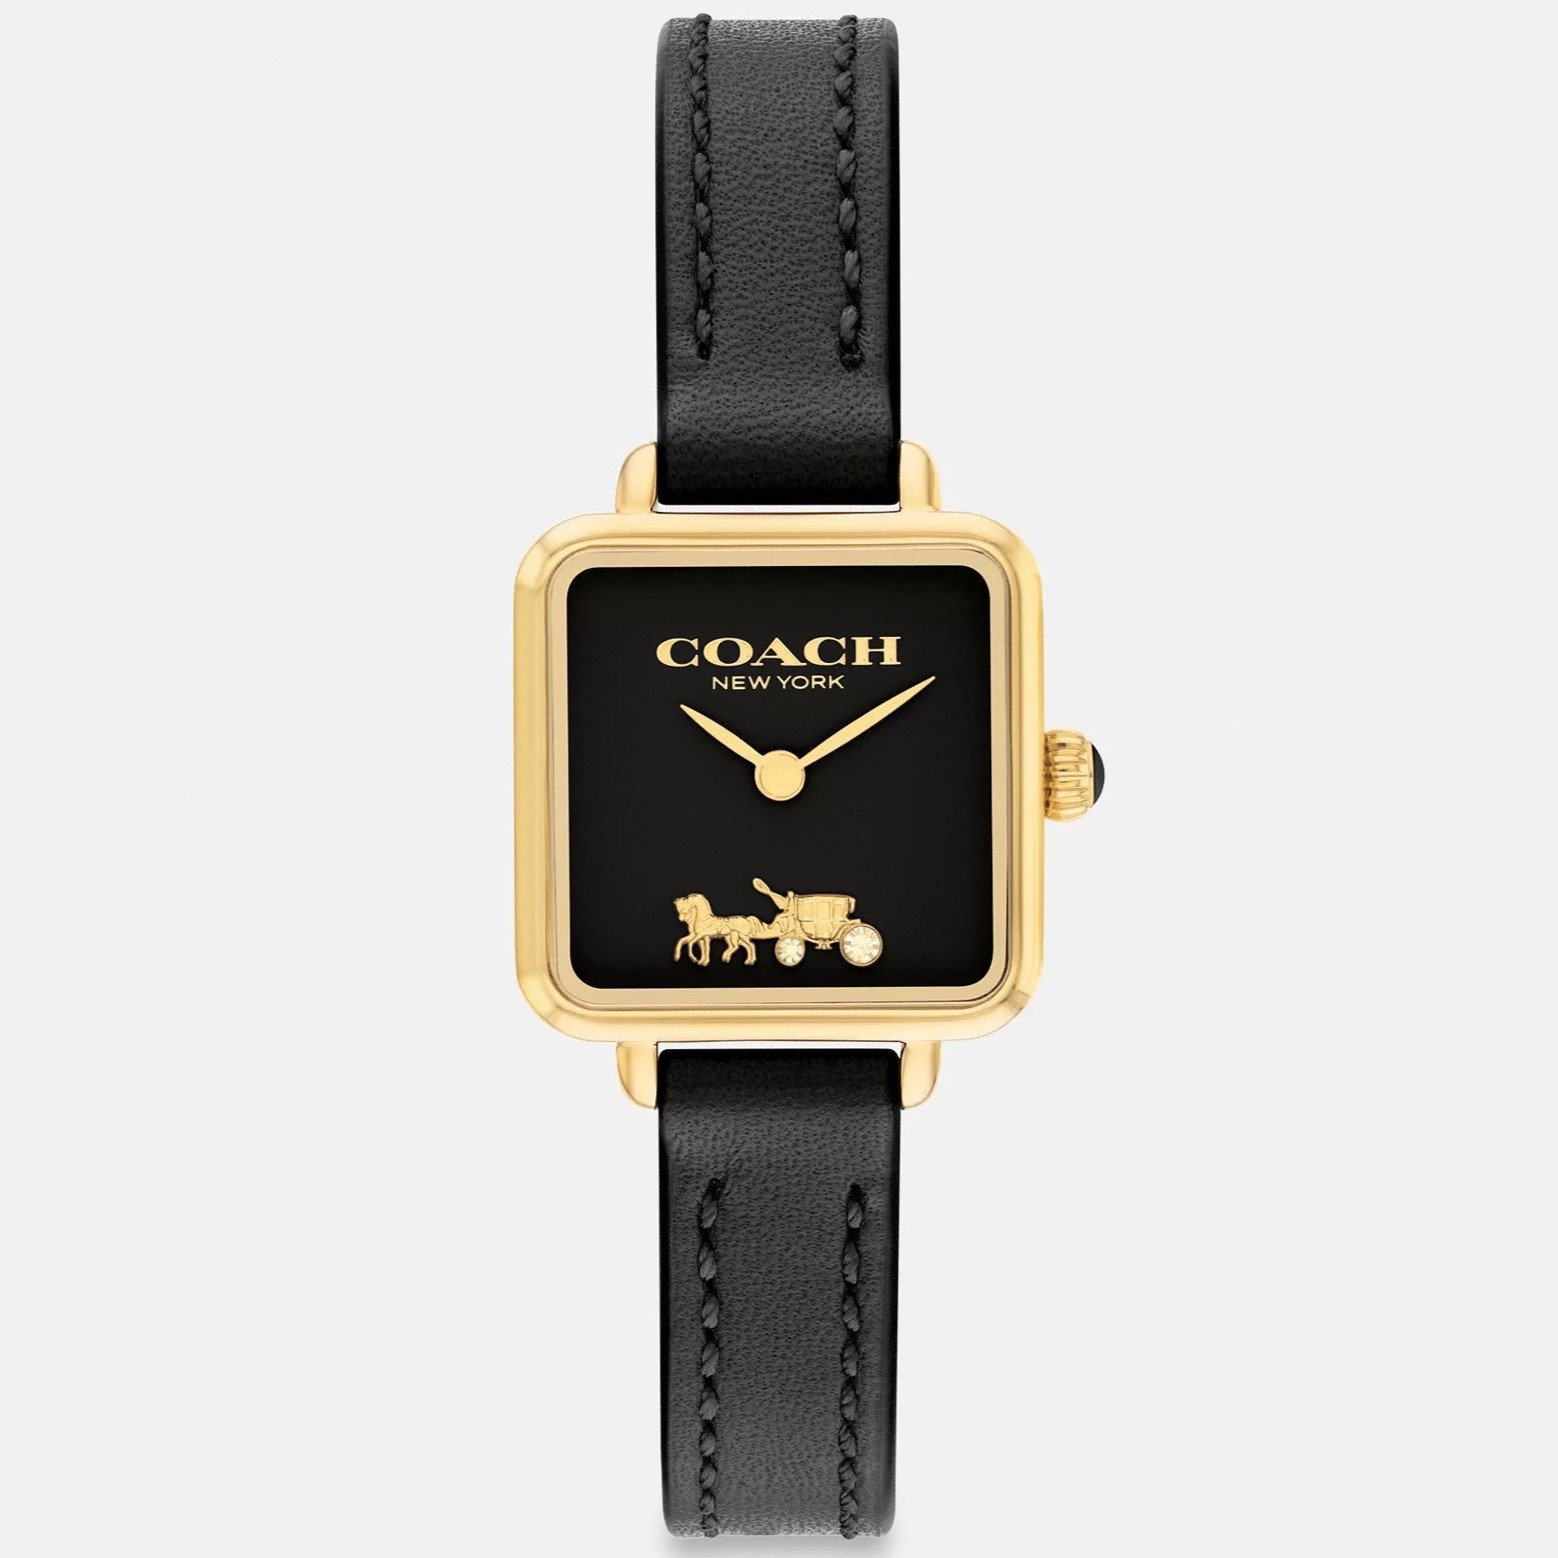 ĐỒNG HỒ NỮ COACH CASS SIGNATURE HORSE AND CARRIAGE ION-PLATED GOLDTONE STEEL AND BLACK LEATHER STRAP WATCH 14504225 4